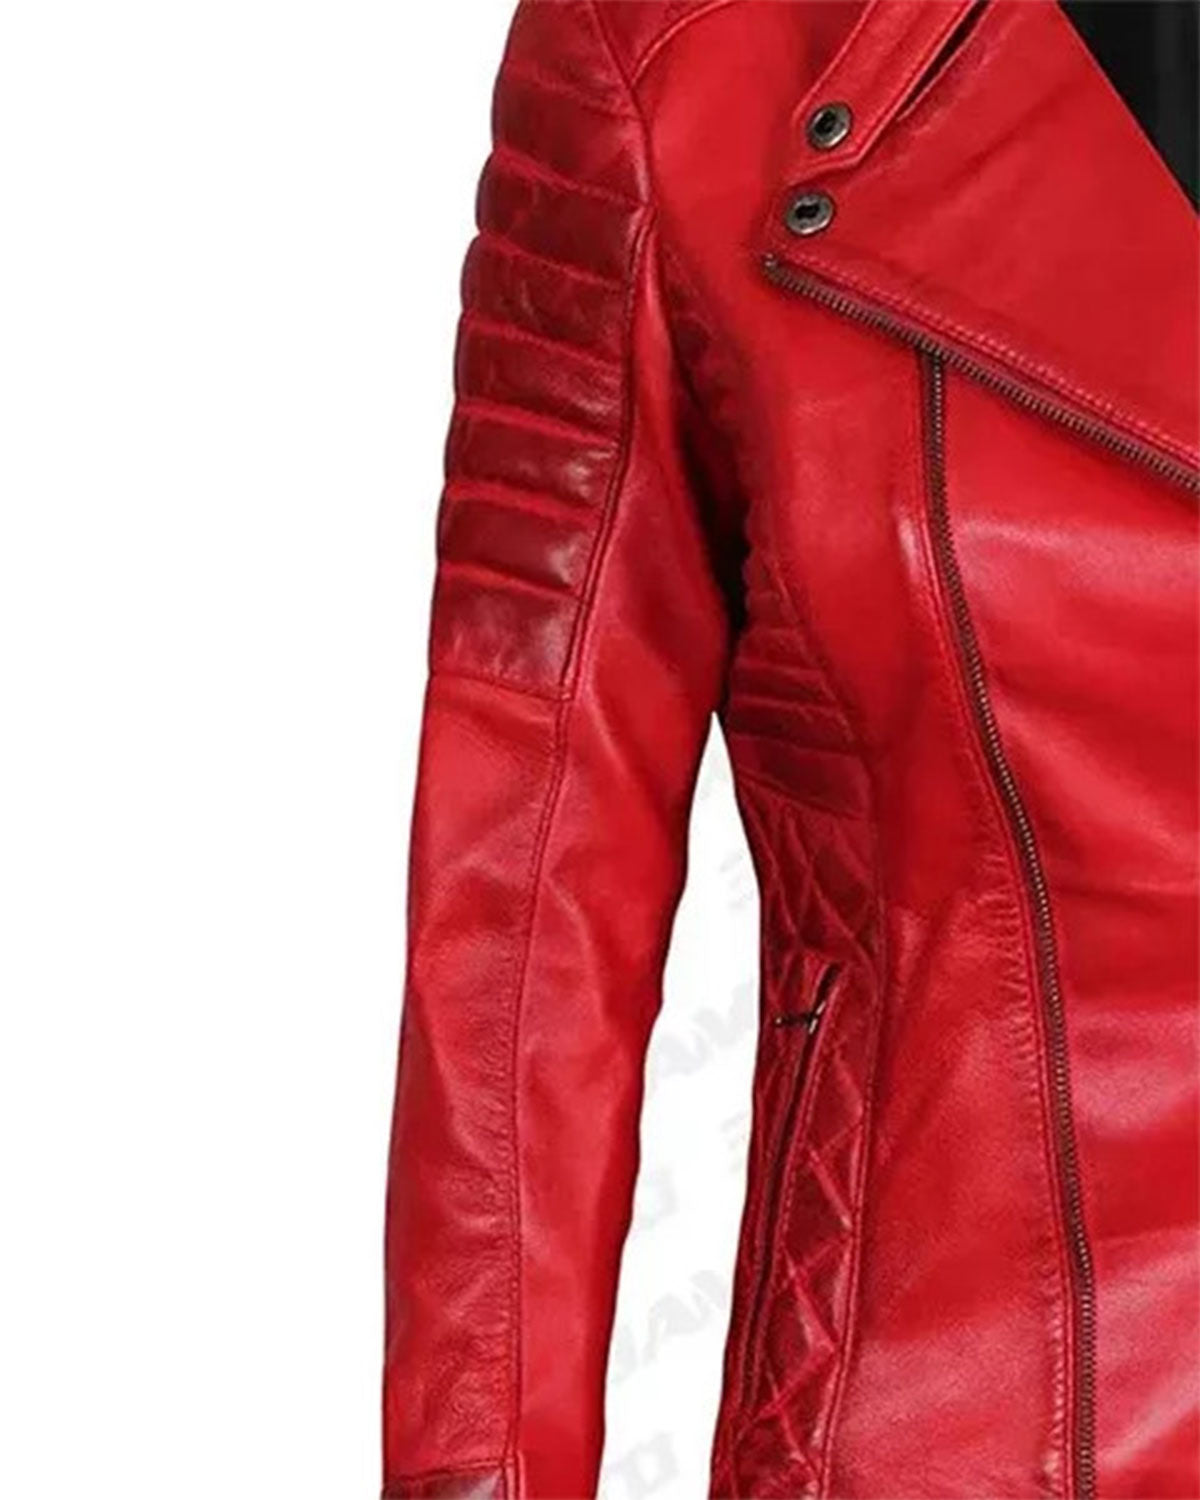 Womens Quilted Merlot Red Leather Biker Jacket